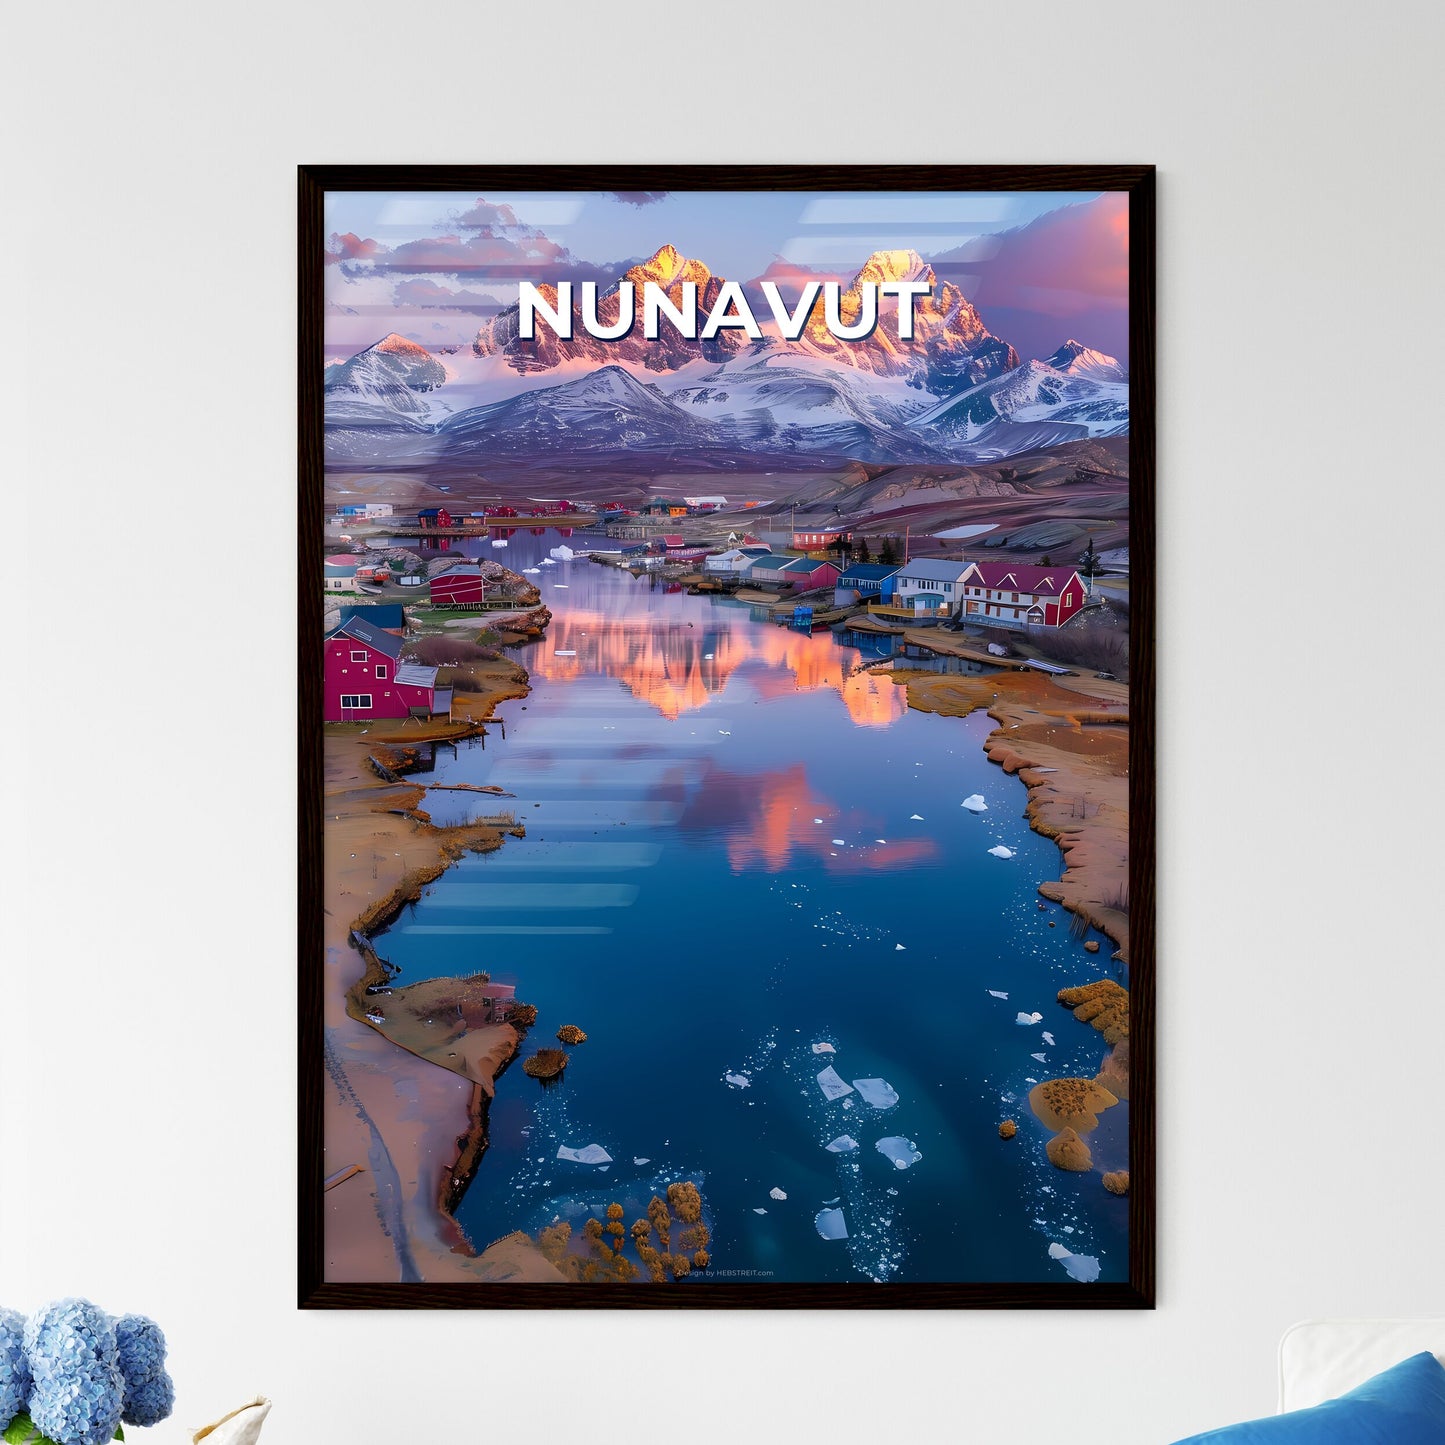 Tranquil Arctic Splendor: Vibrant Northern Landscape Painting of River, Lake, and Snowy Mountains in Nunavut, Canada